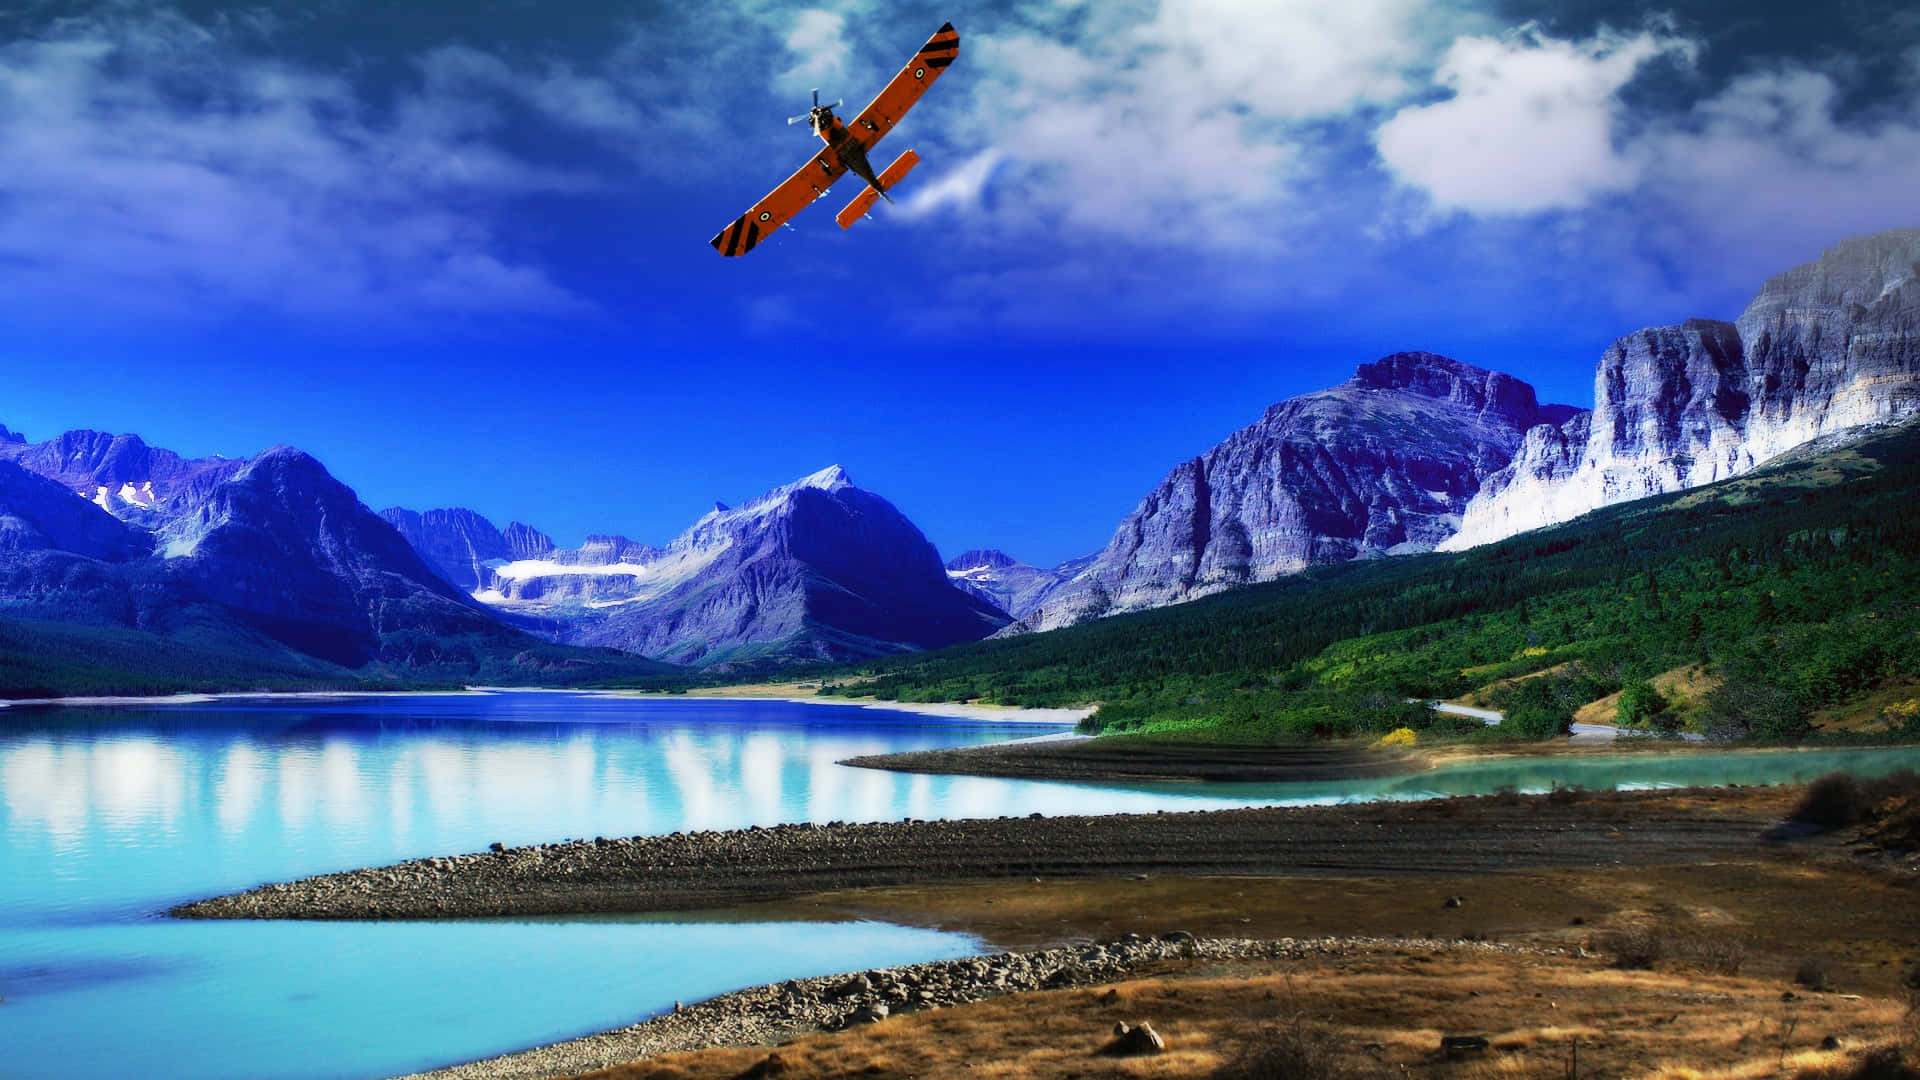 Small Airplane In Red Hover Over Landscape Wallpaper